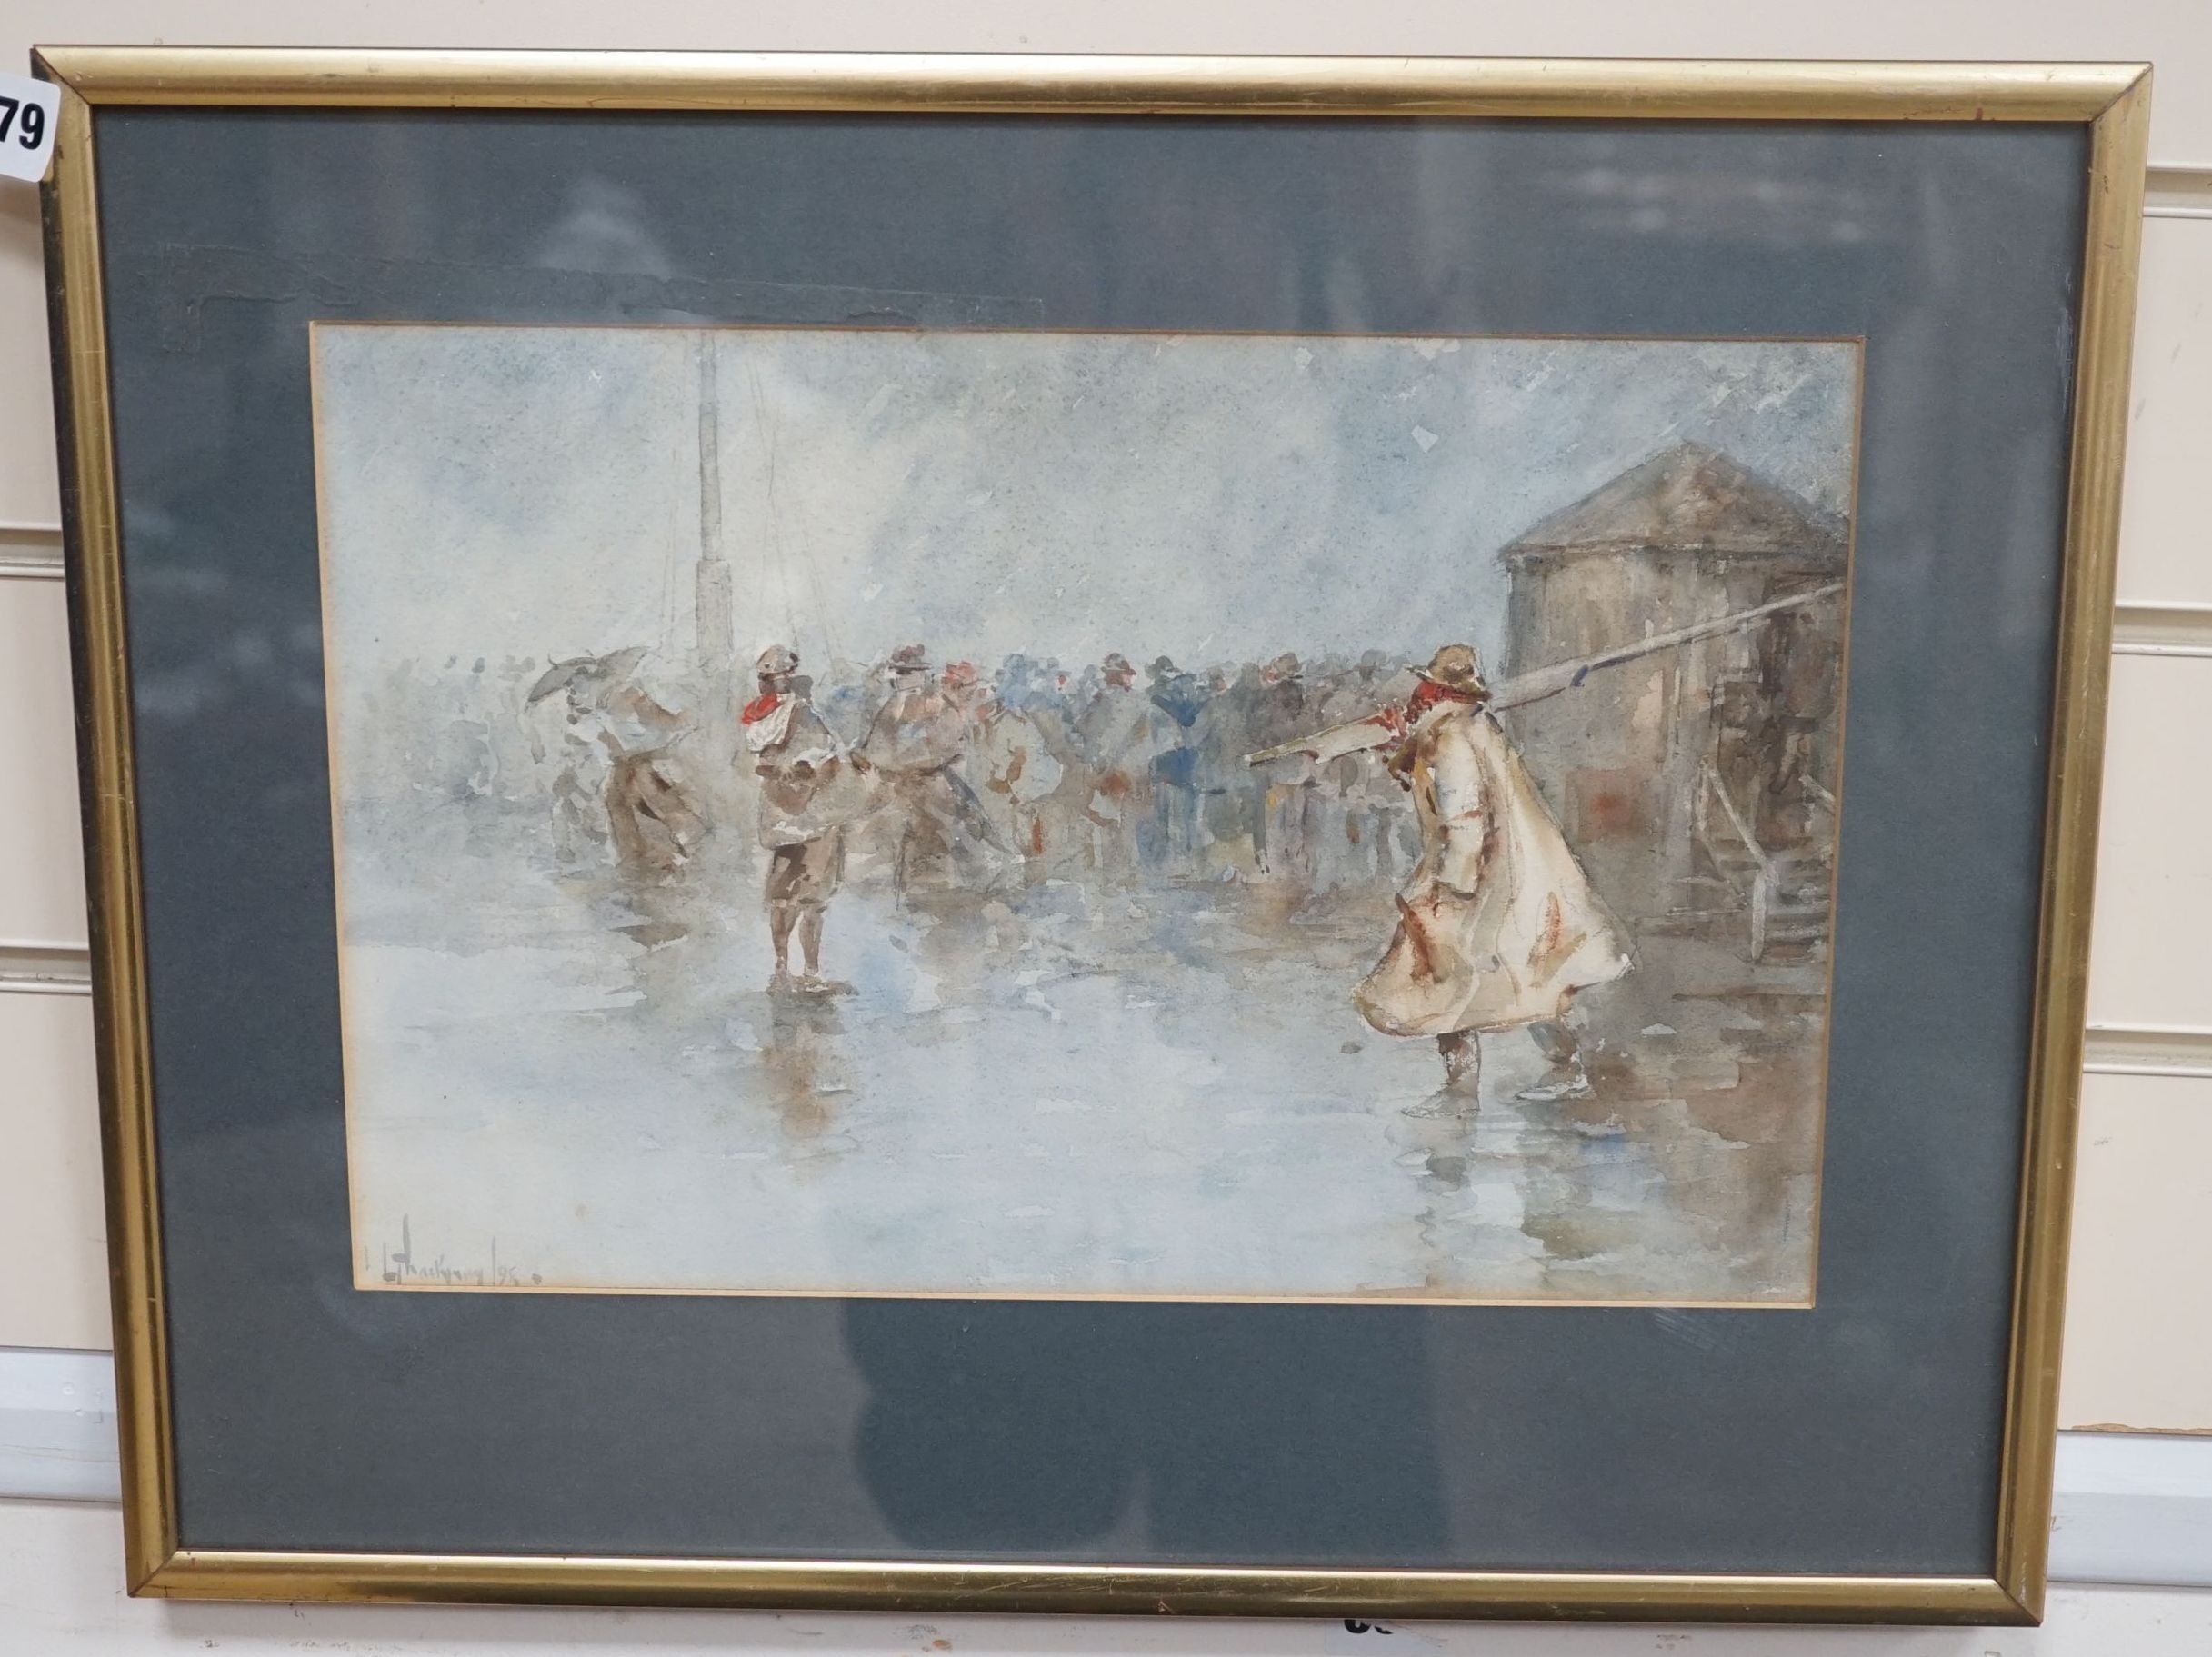 Lance Thackeray (1869-1916), watercolour, Fisherfolk on the wharf, signed and dated '98, 23 x 35cm